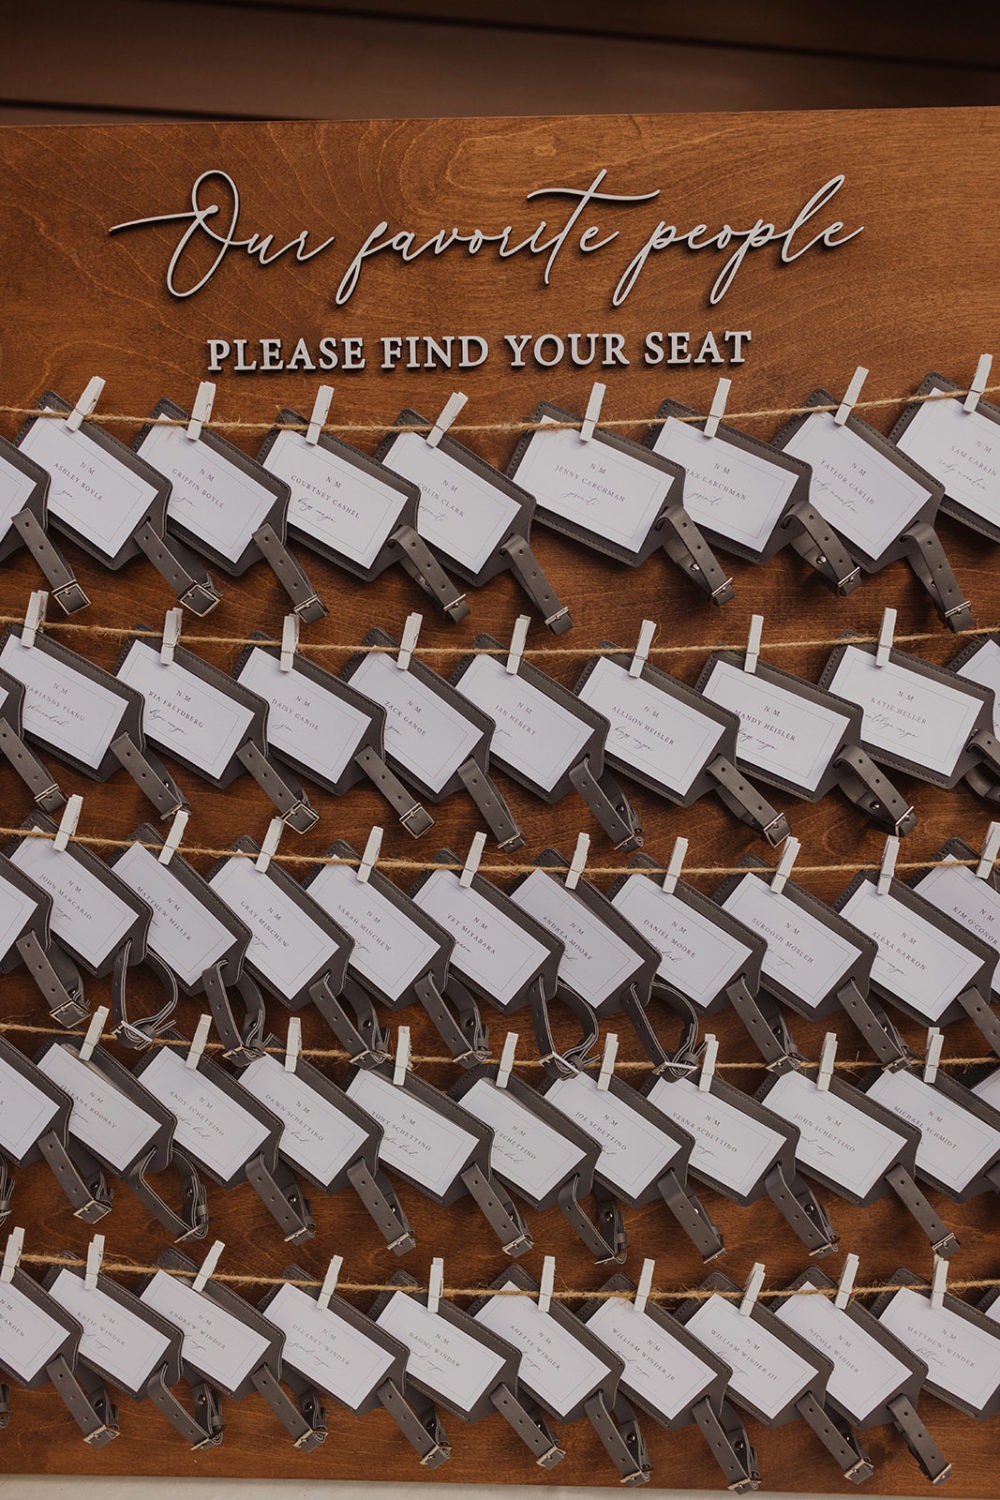 luggage tags as seating charts for wedding reception